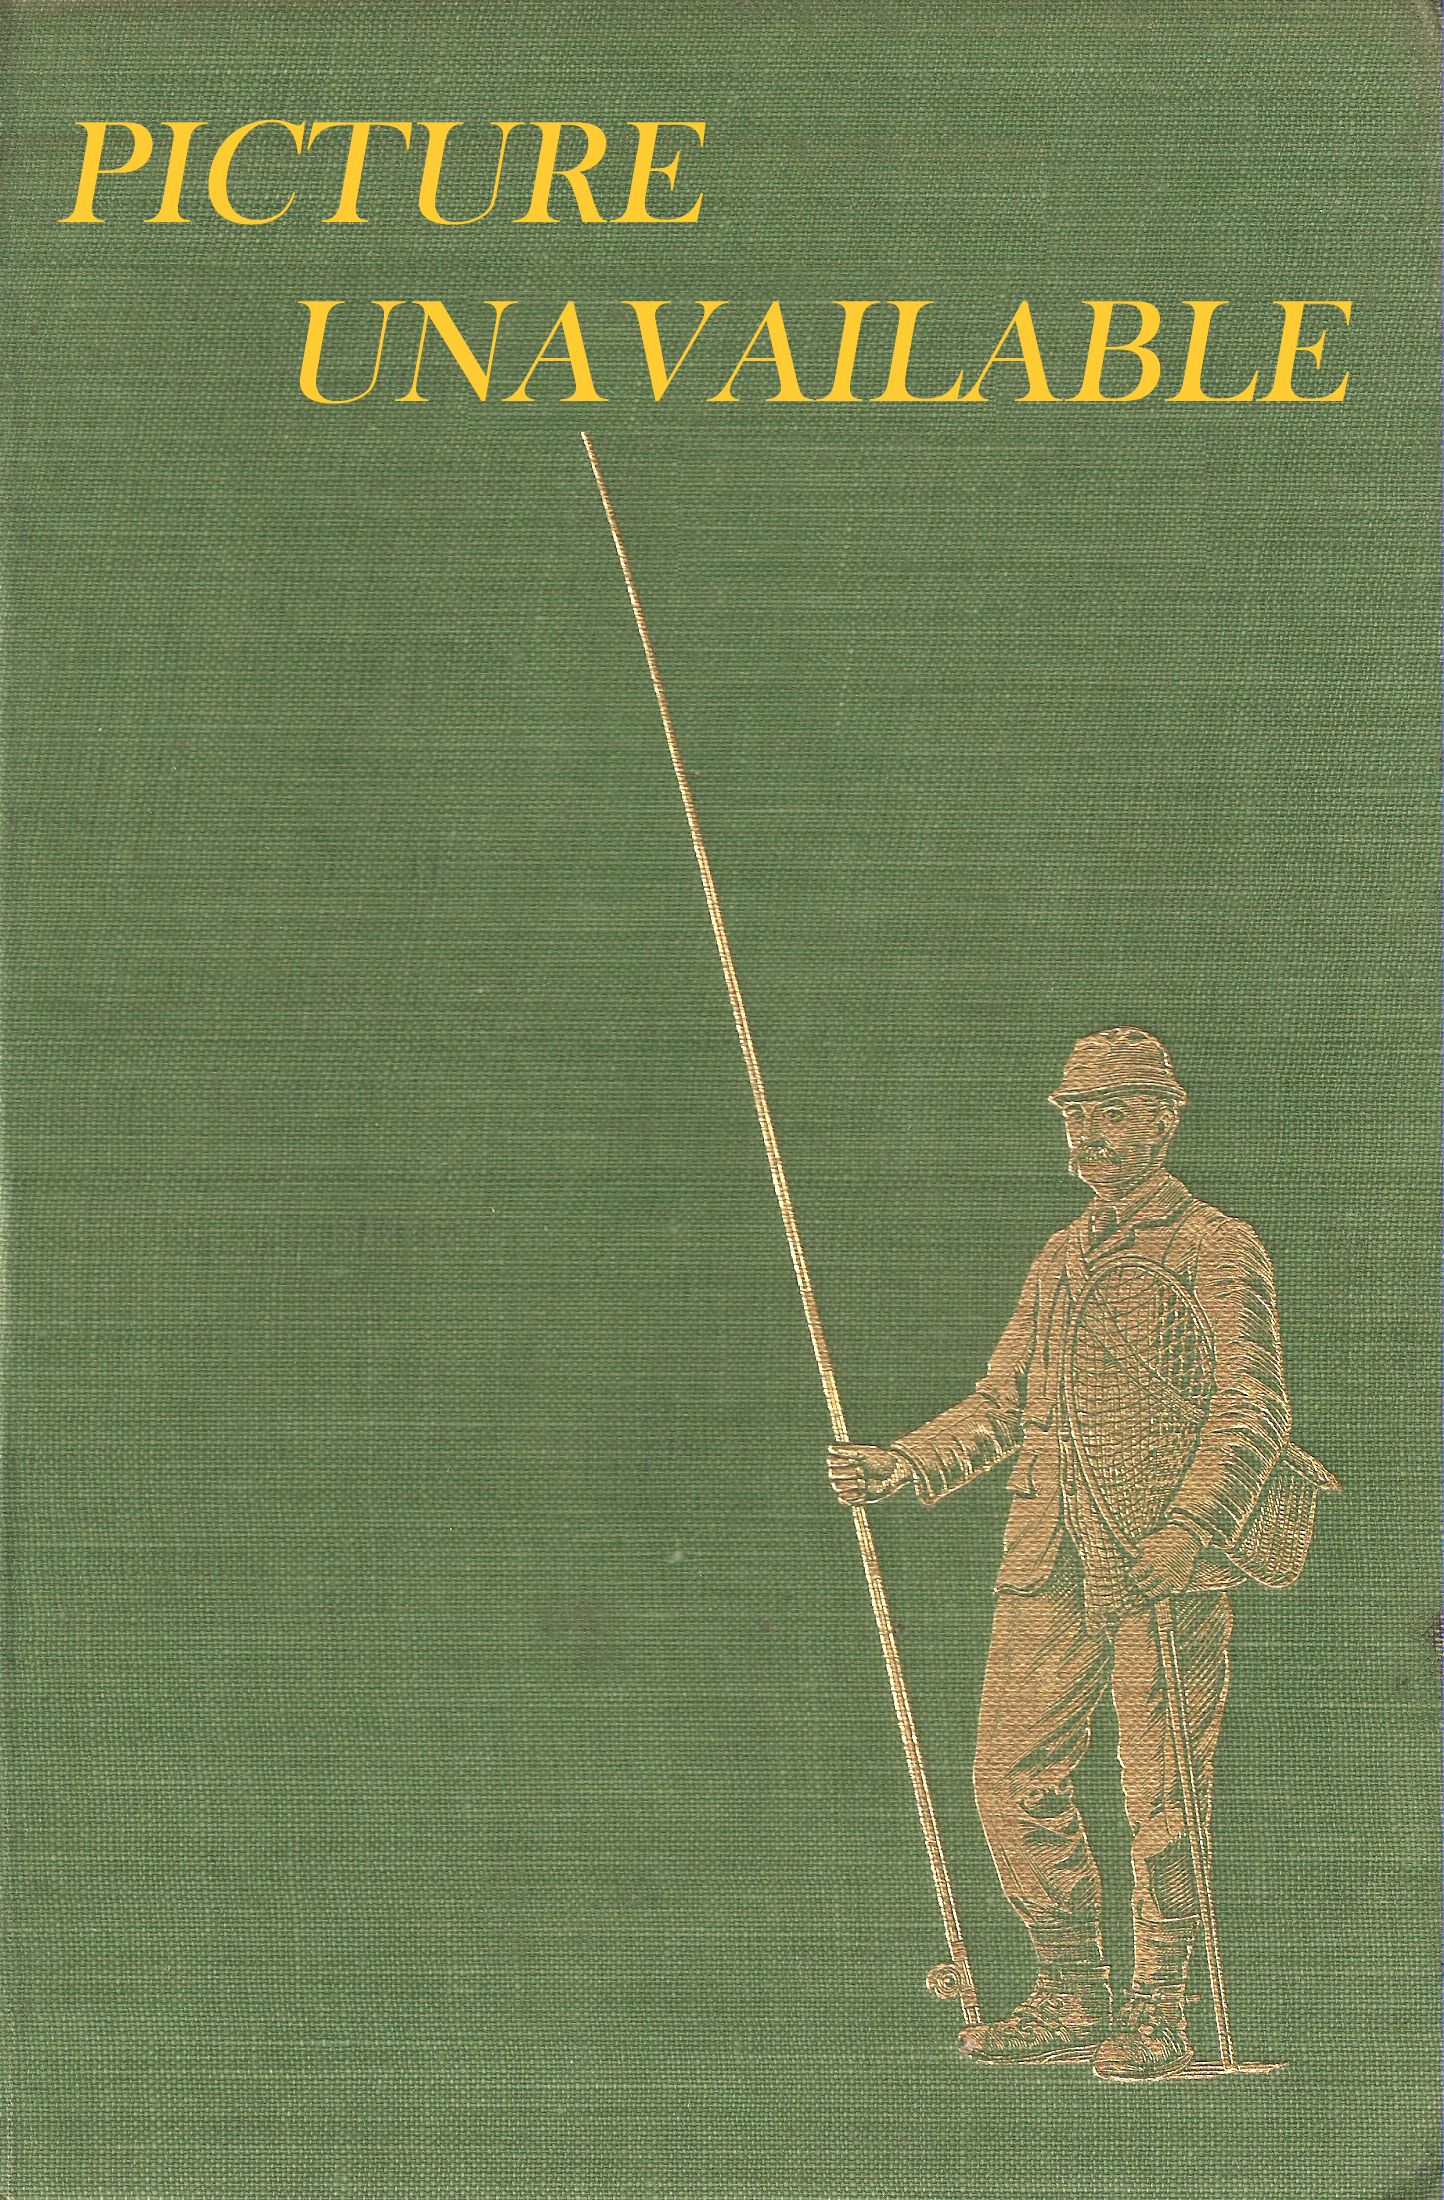 SALMON FISHING: A PRACTICAL GUIDE. By Hugh Falkus. First edition.